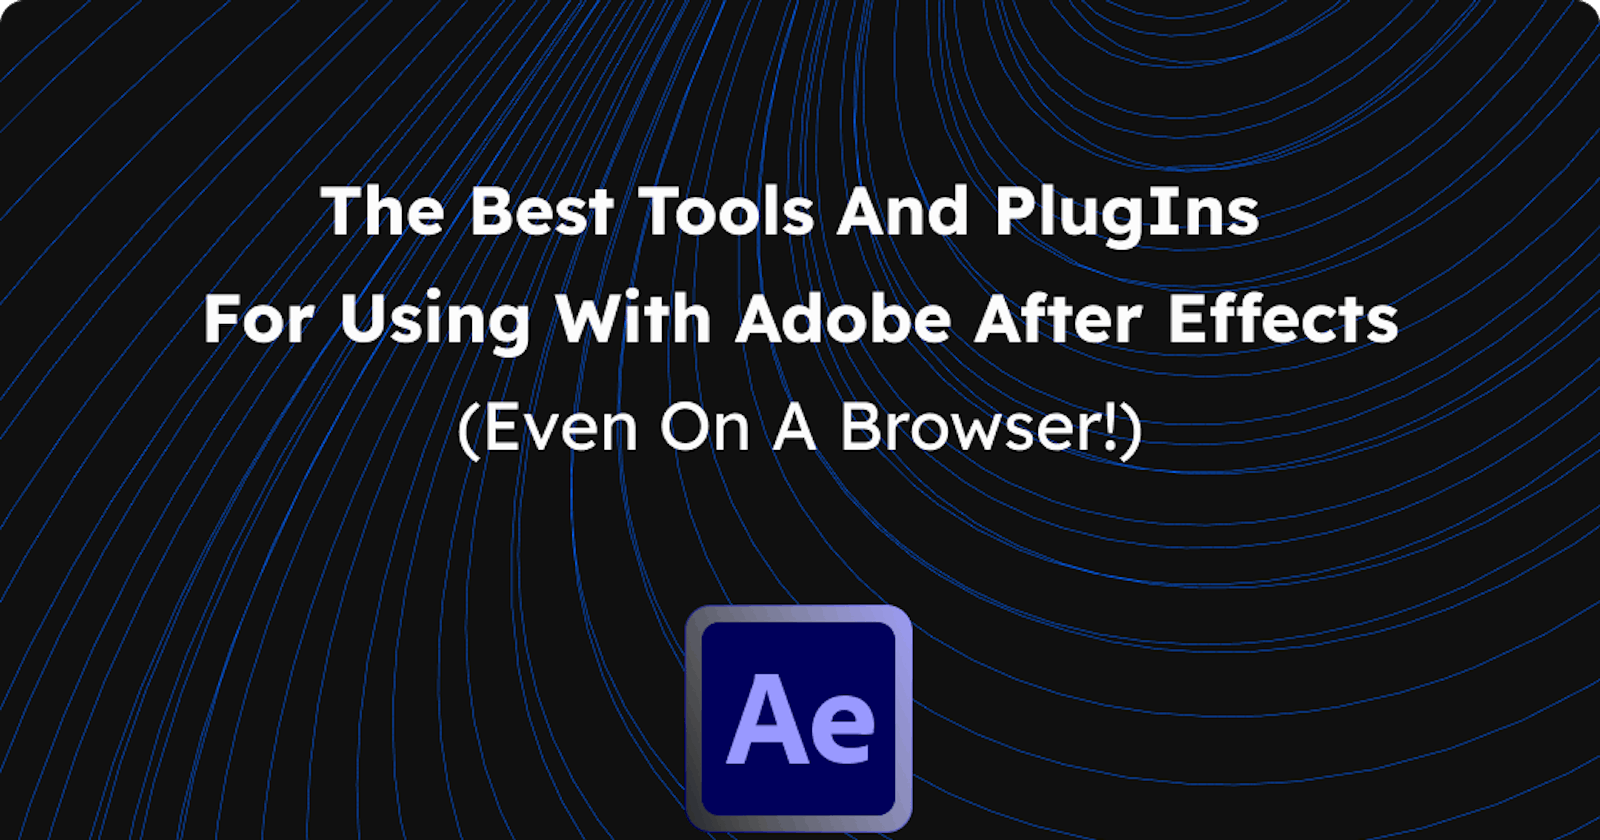 The Best Tools & PlugIns for Using Adobe After Effects (On a browser!)